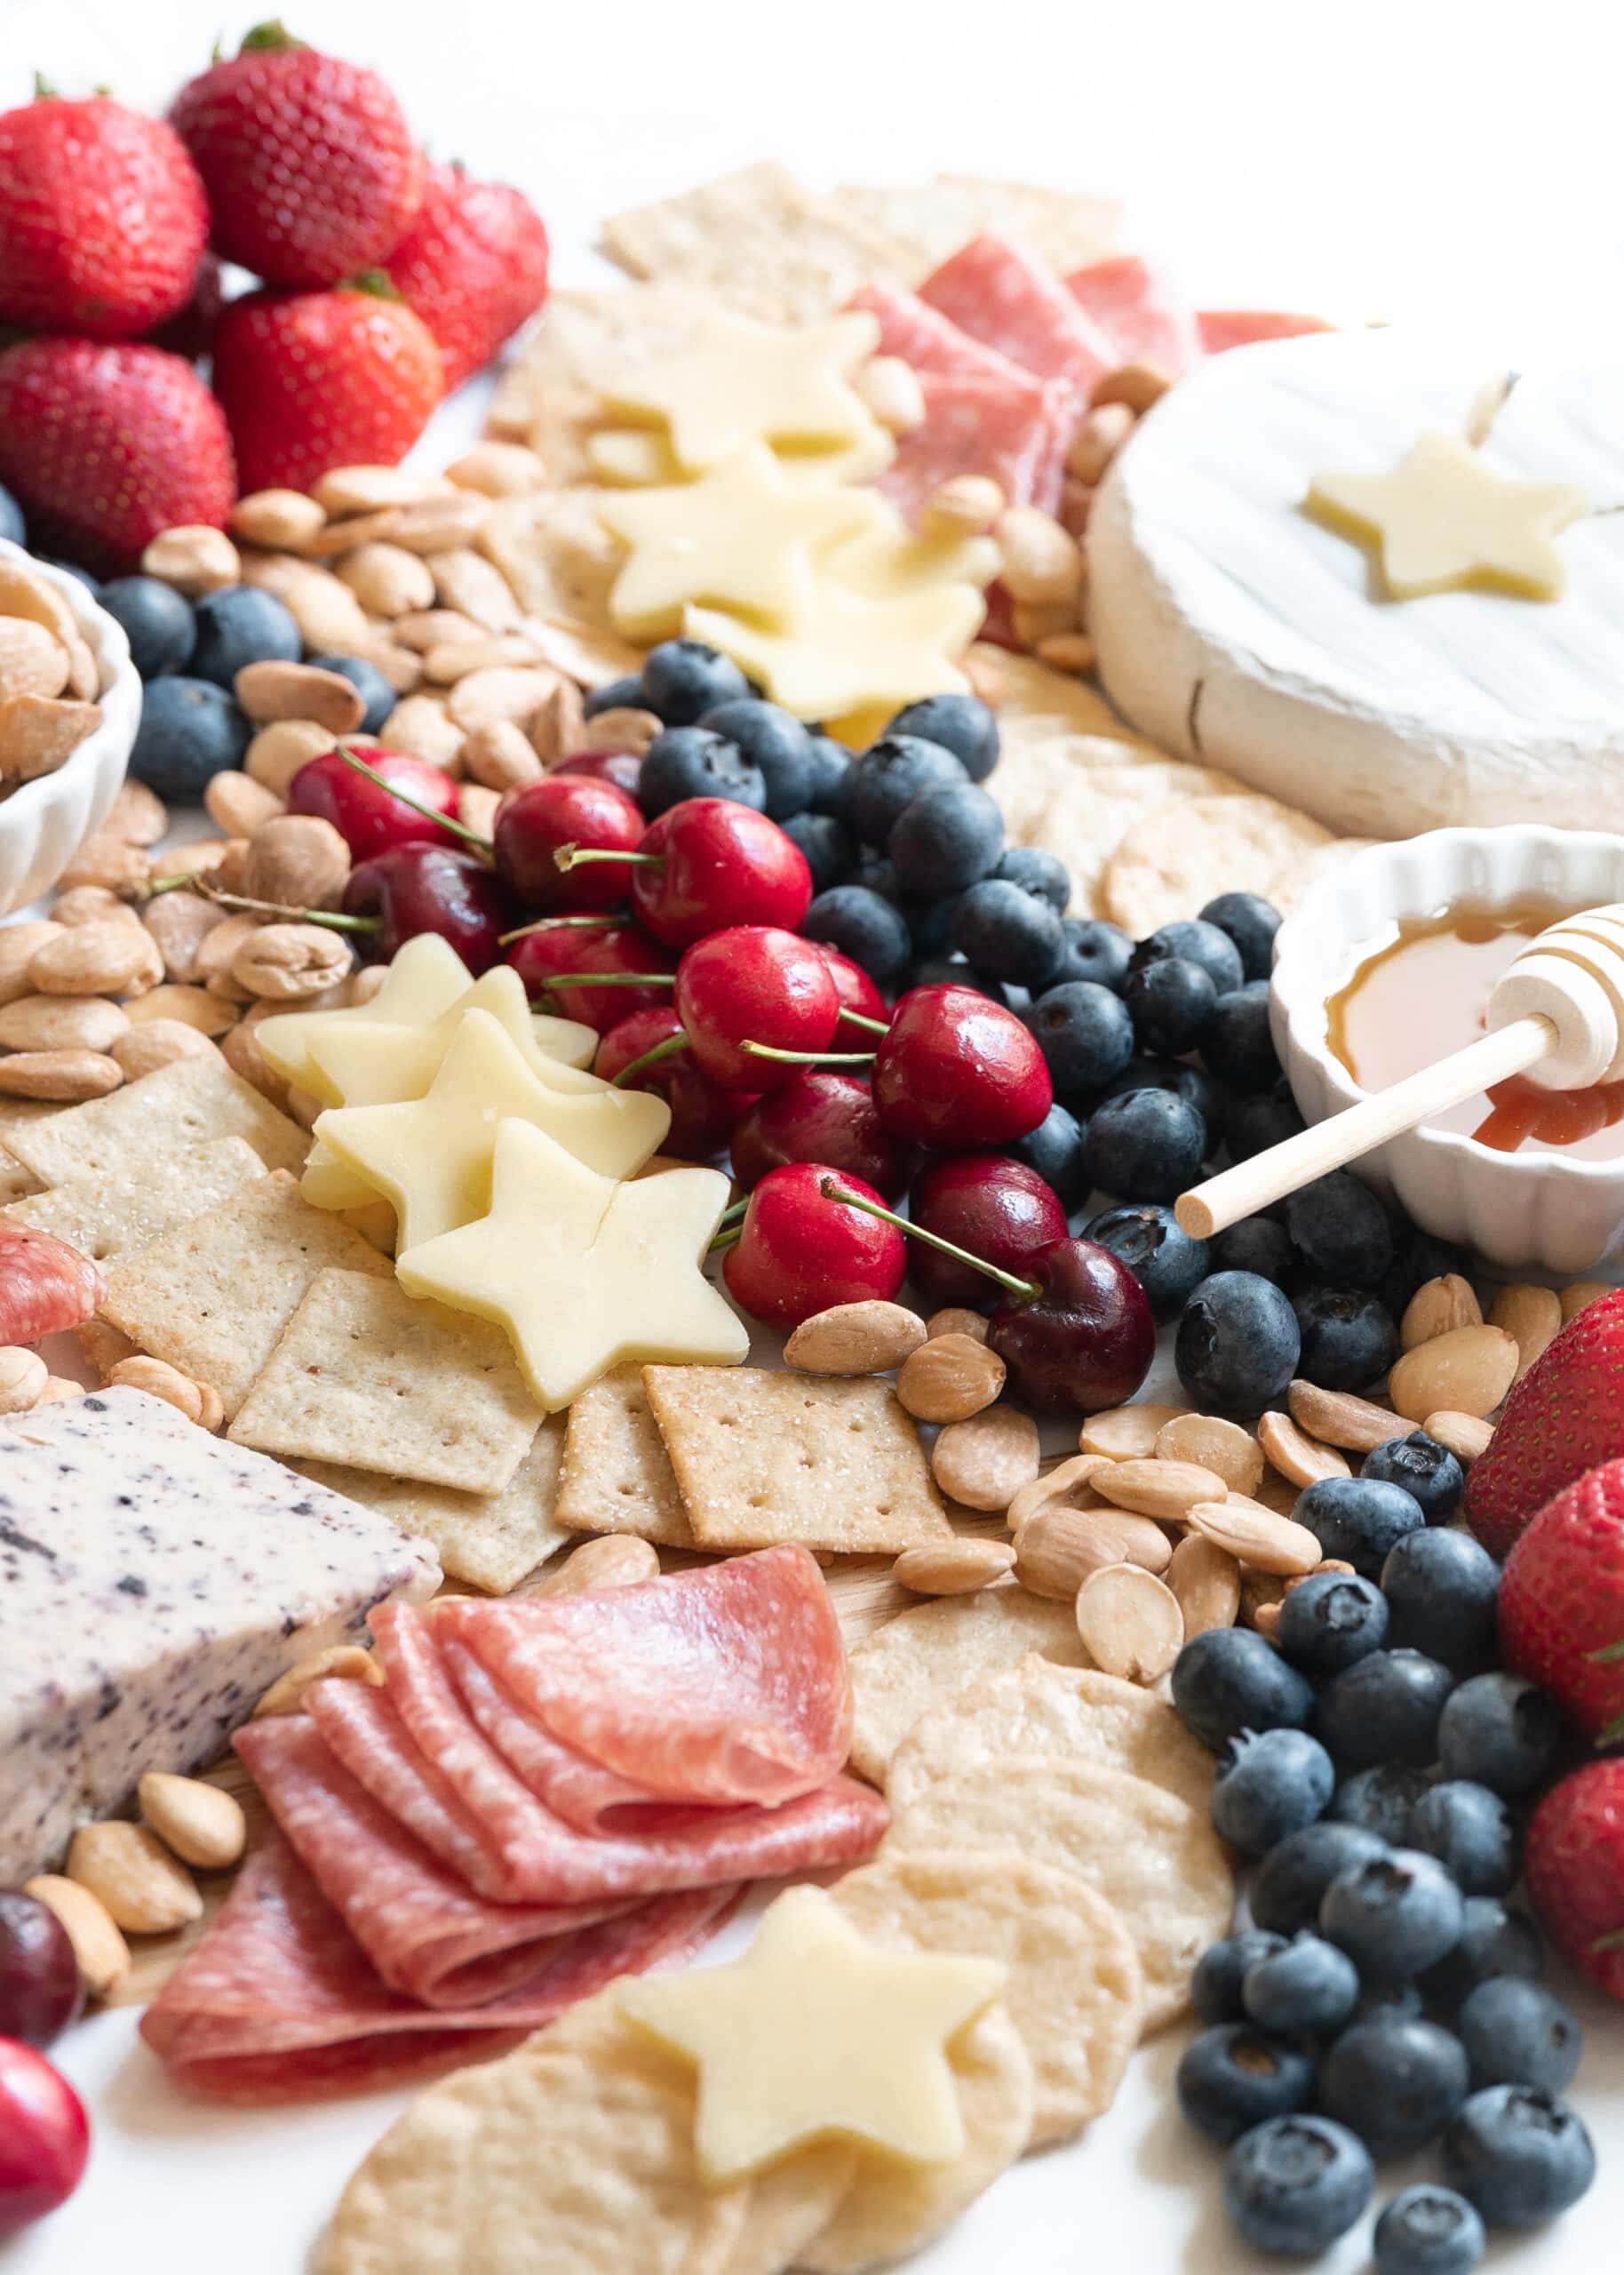 A photo of the patriotic charcuterie board from a front perspective. Gluten-free crackers, strawberries, blueberries, cherries, salami, white cheddar cheese, brie, blueberry cheese, almonds, and honey are on the board.